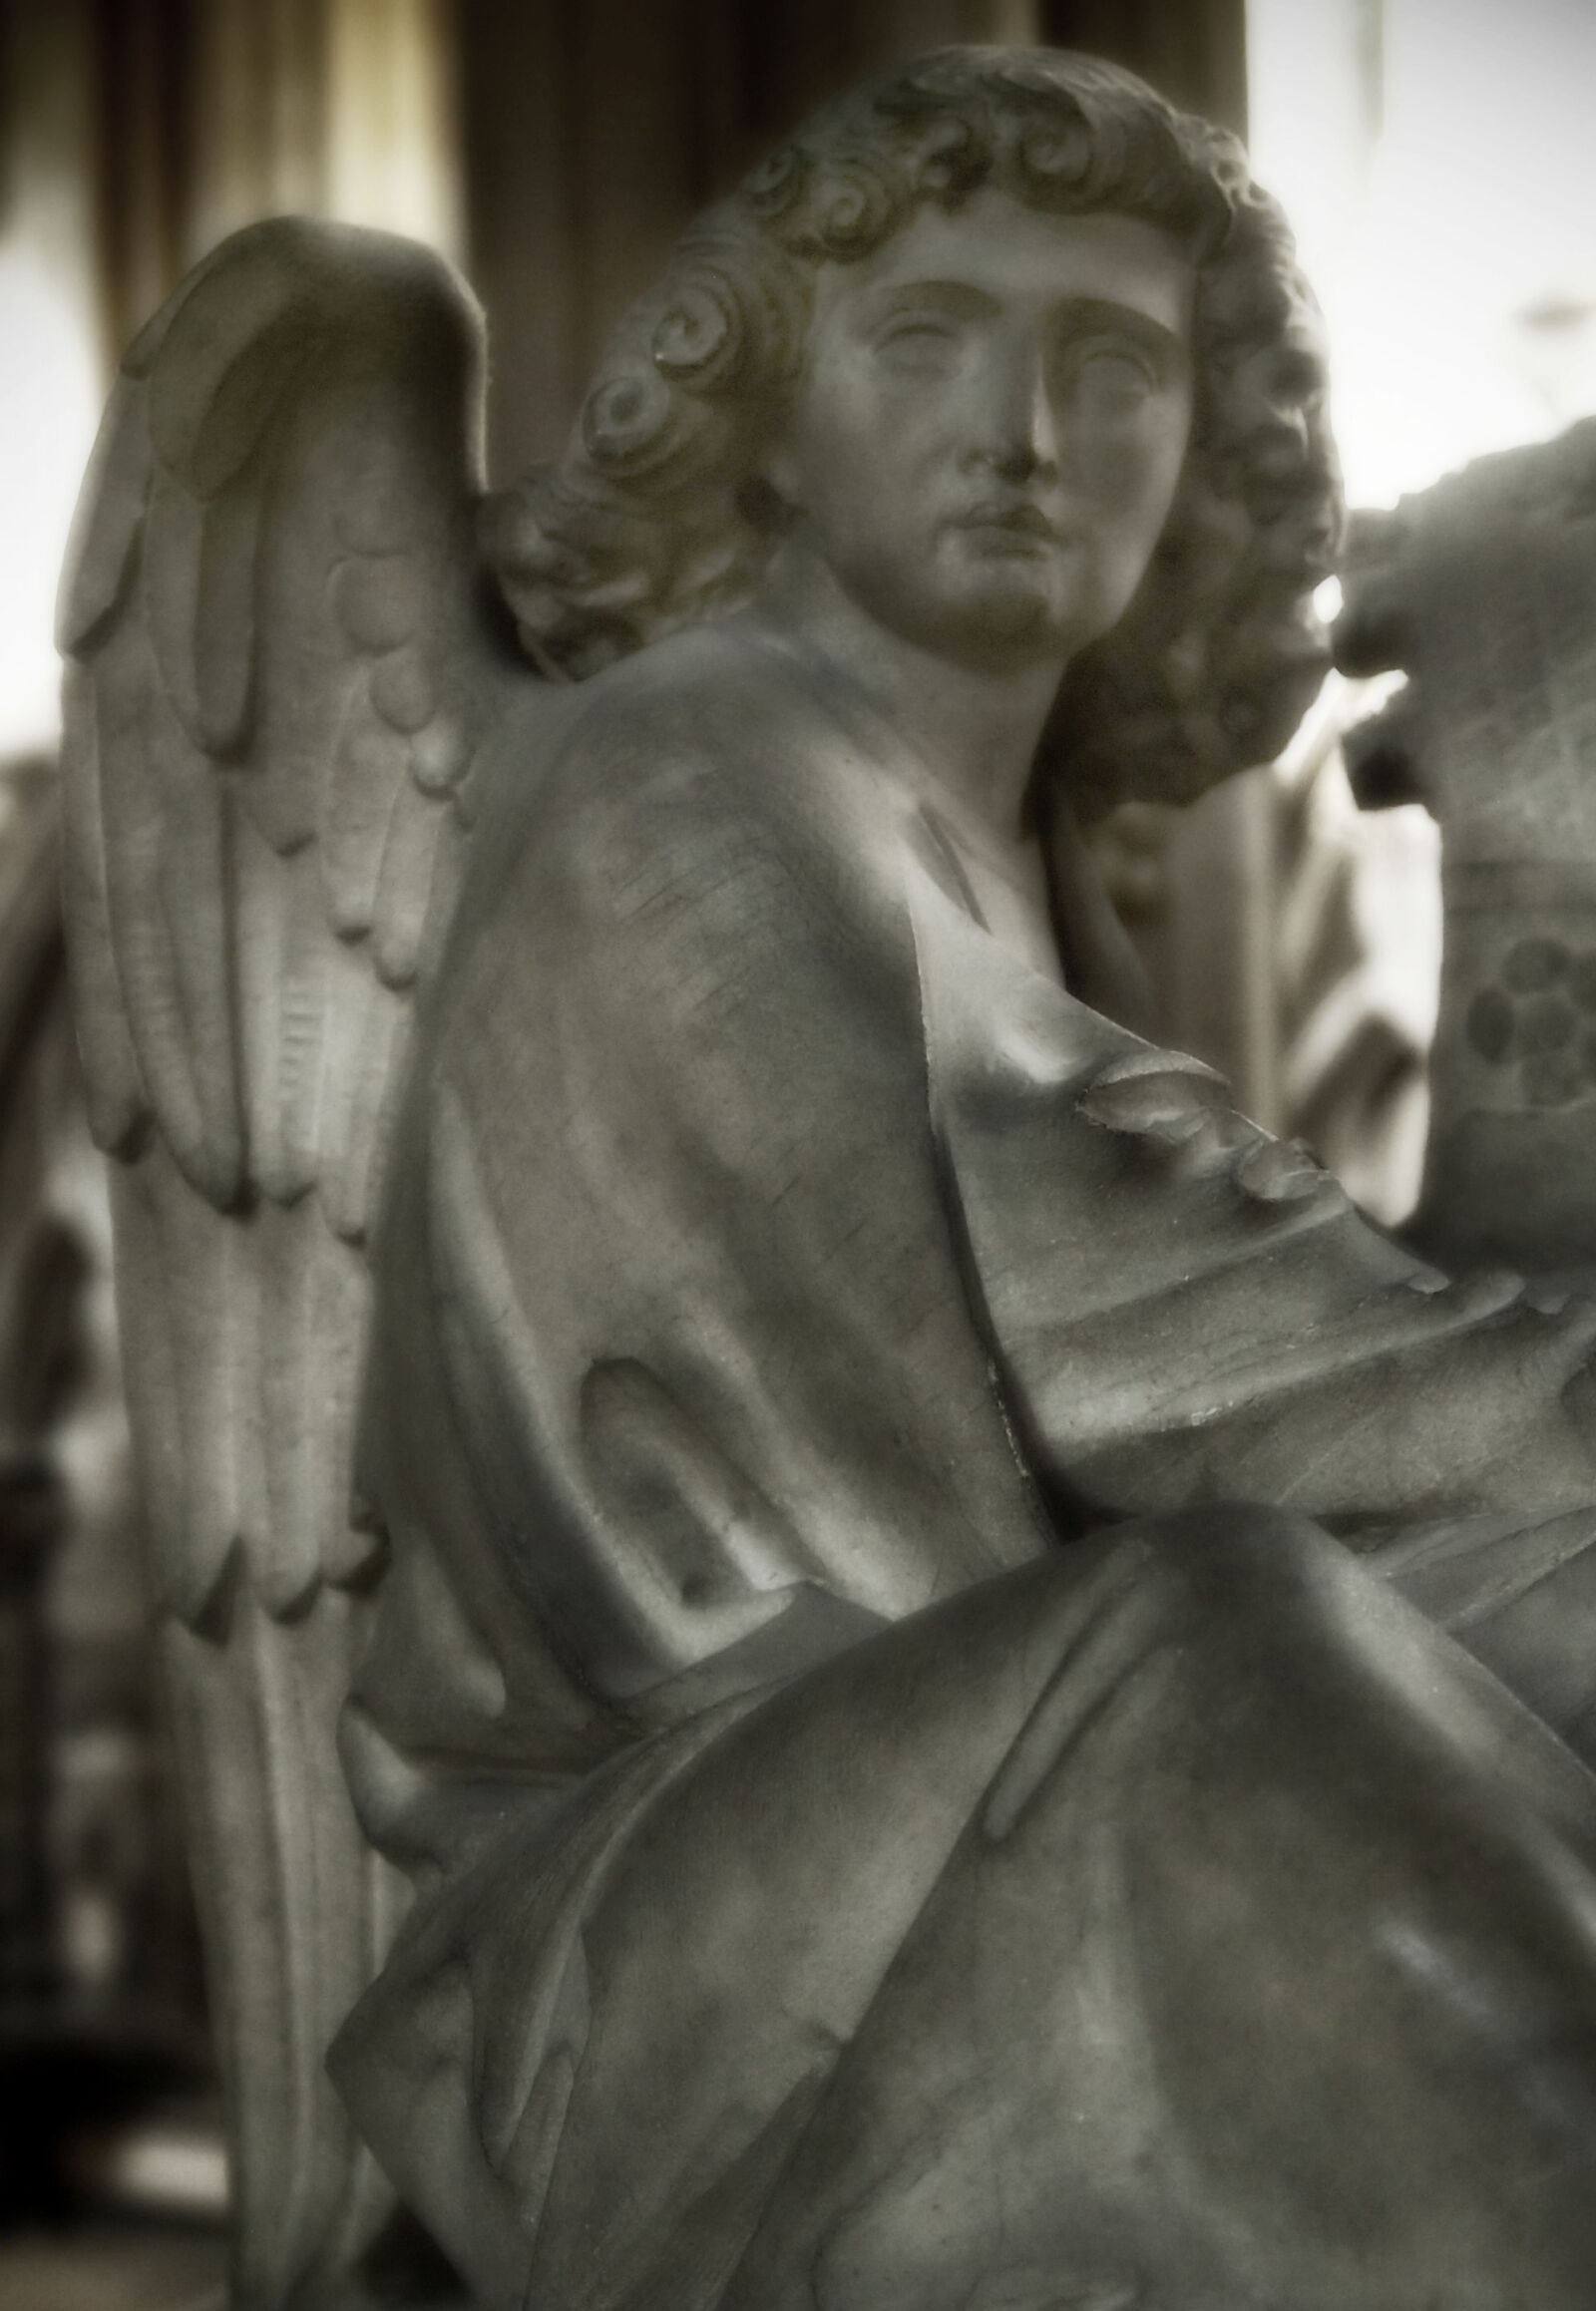 Olympus PEN E-PL1 sample photo. Angel, angelic, beauty, cathedral photography